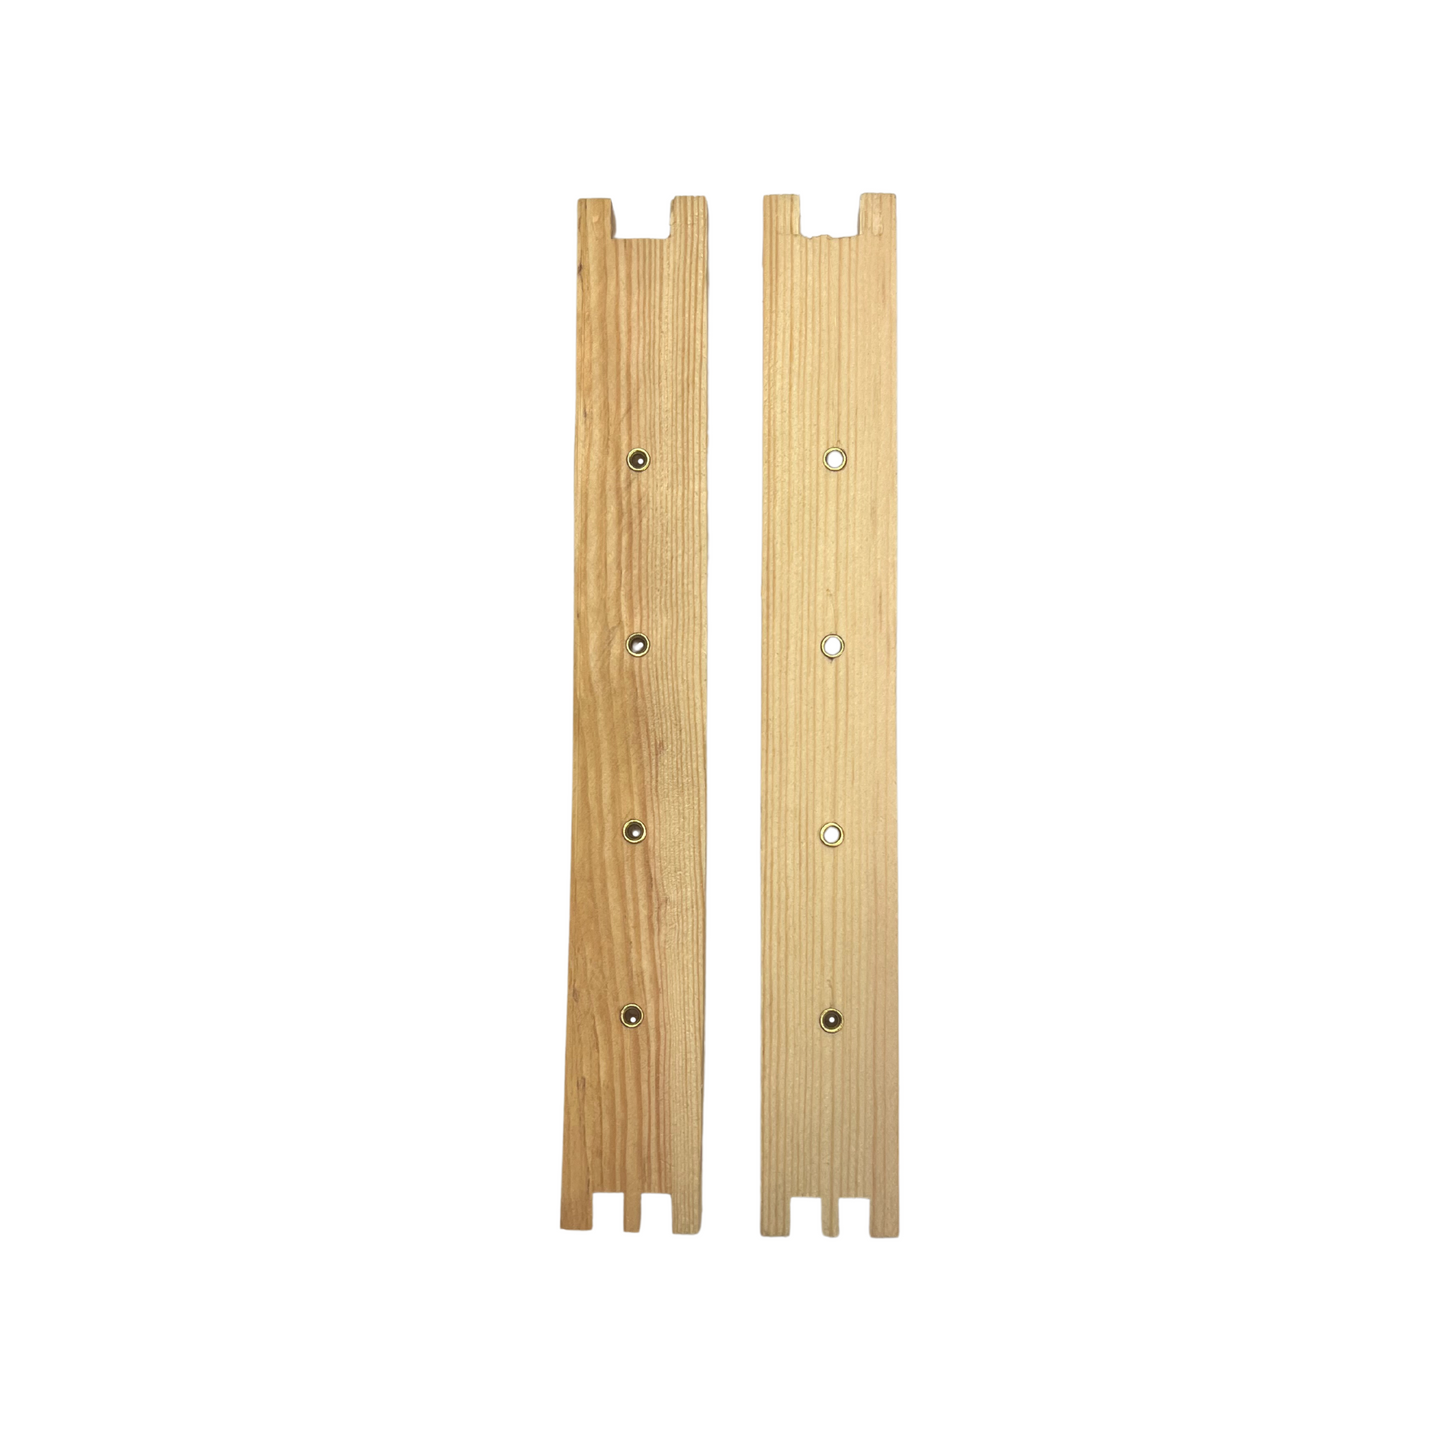 50 National Brood DN1 Frames with Holes, Flat, Second Grade